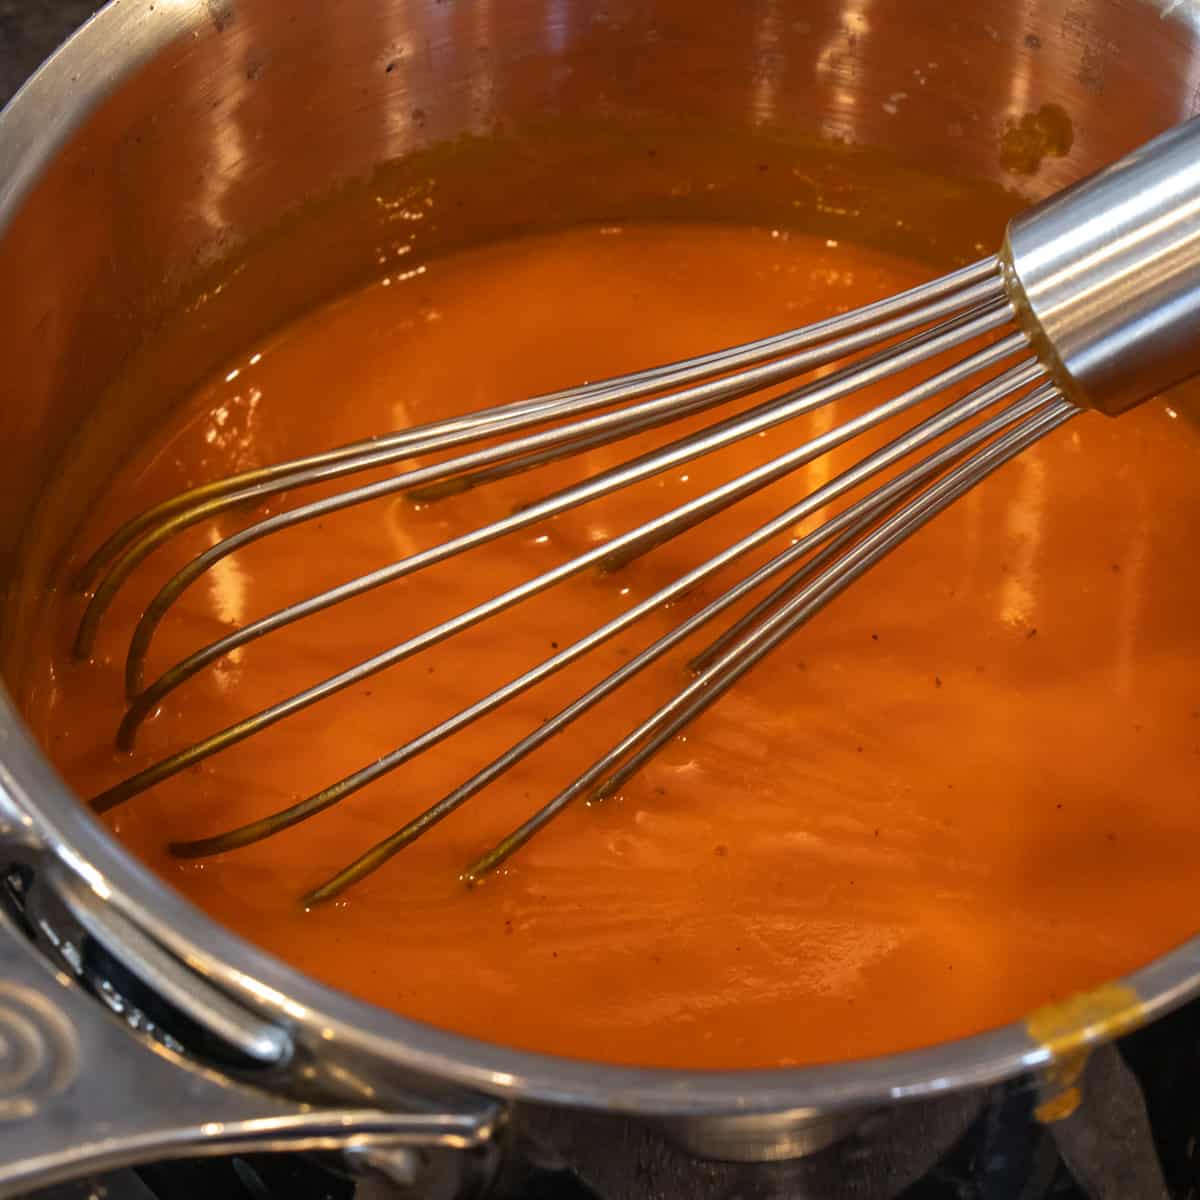 Making the buffalo sauce on the stovetop.